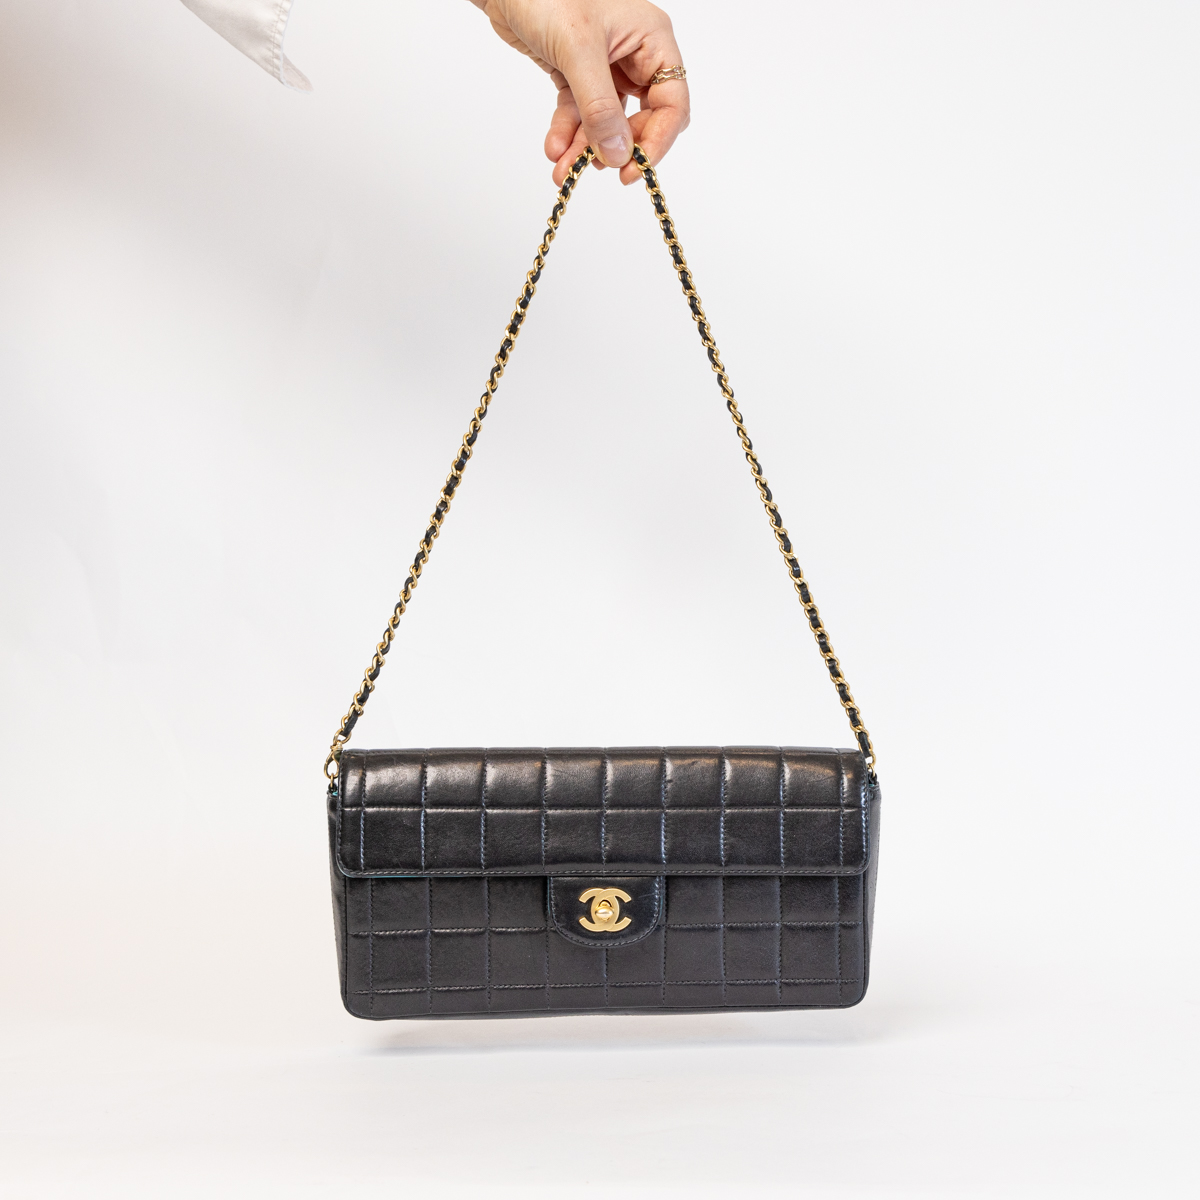 Chanel Classic Baguette bag black with gold hardware